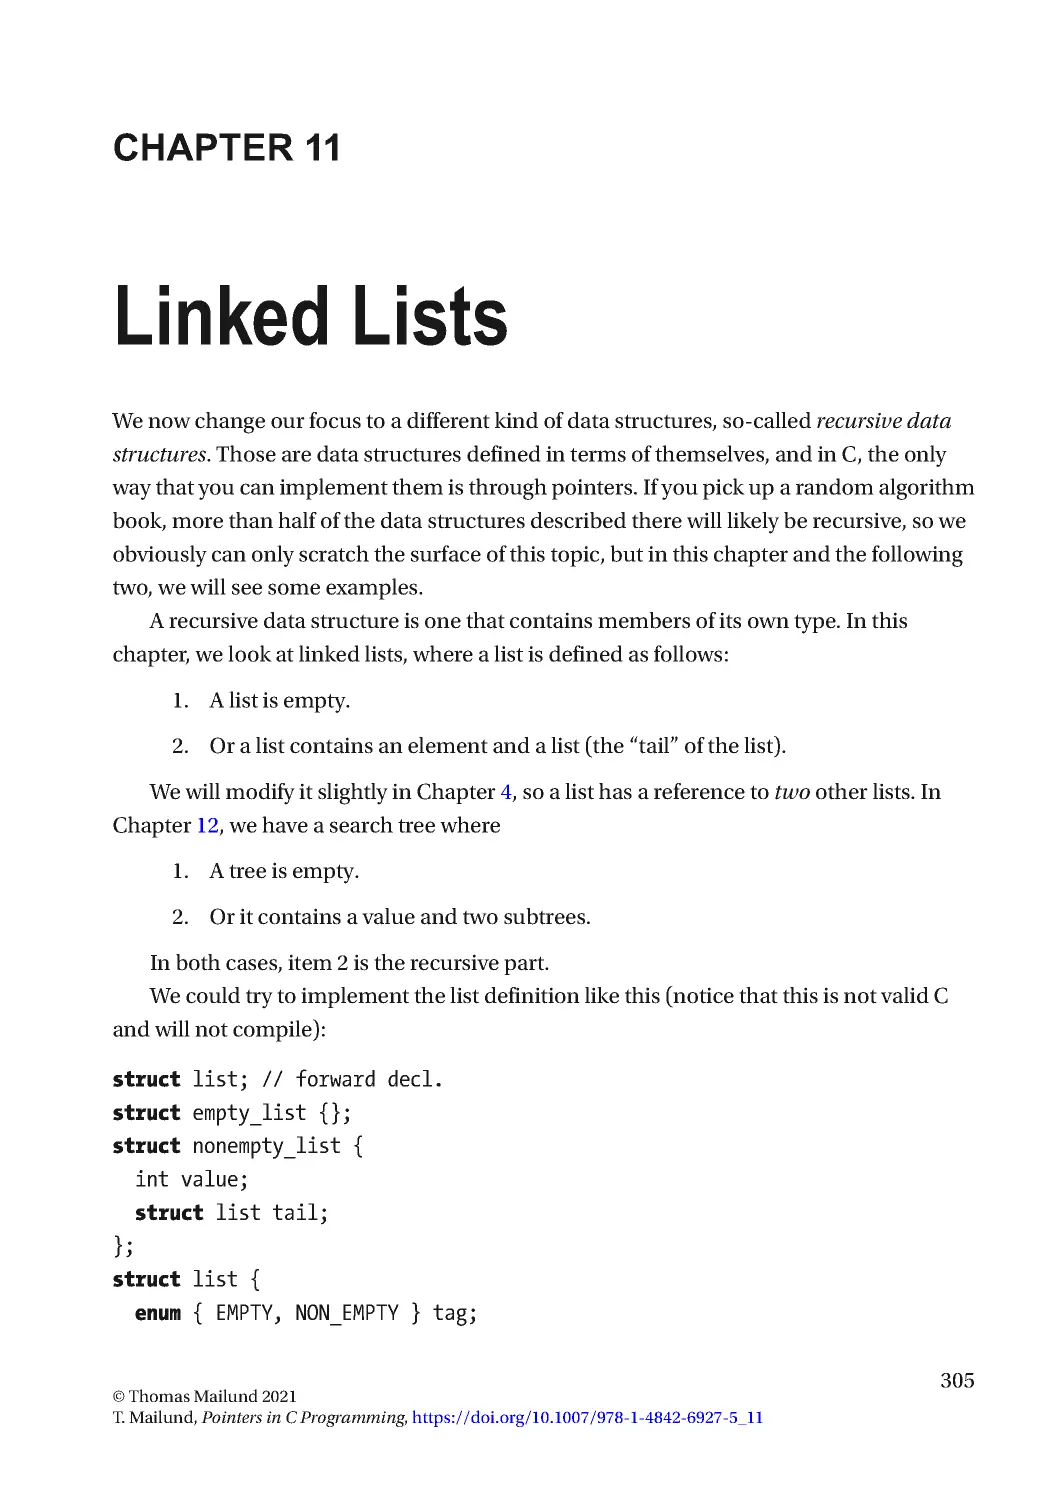 Chapter 11: Linked Lists